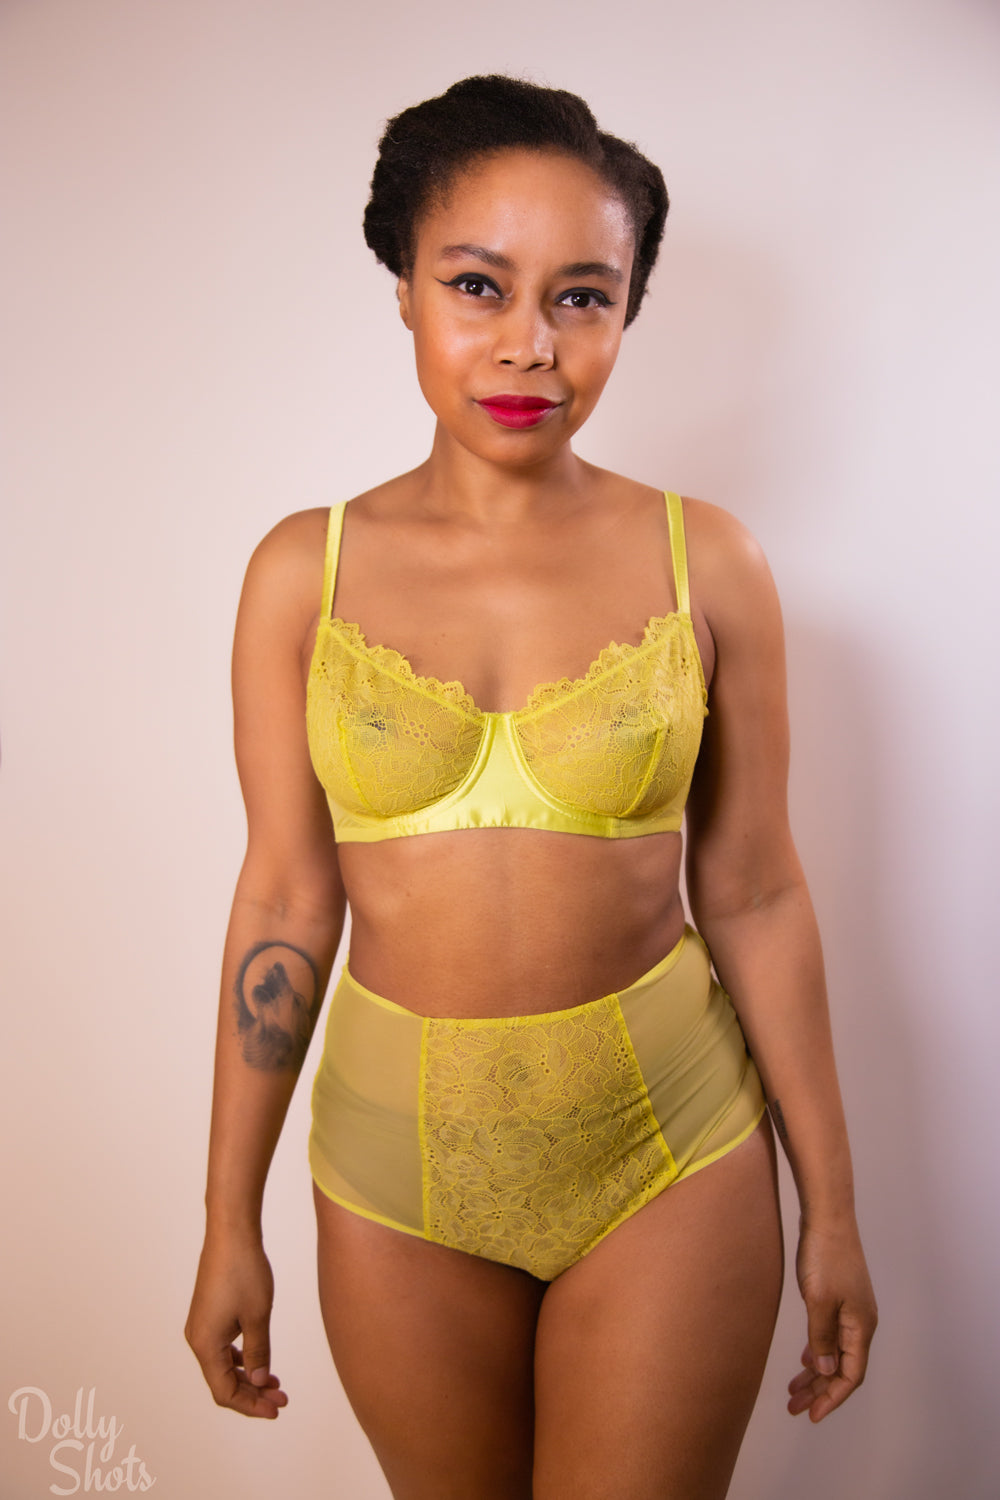 Wholesale french lingerie For An Irresistible Look 